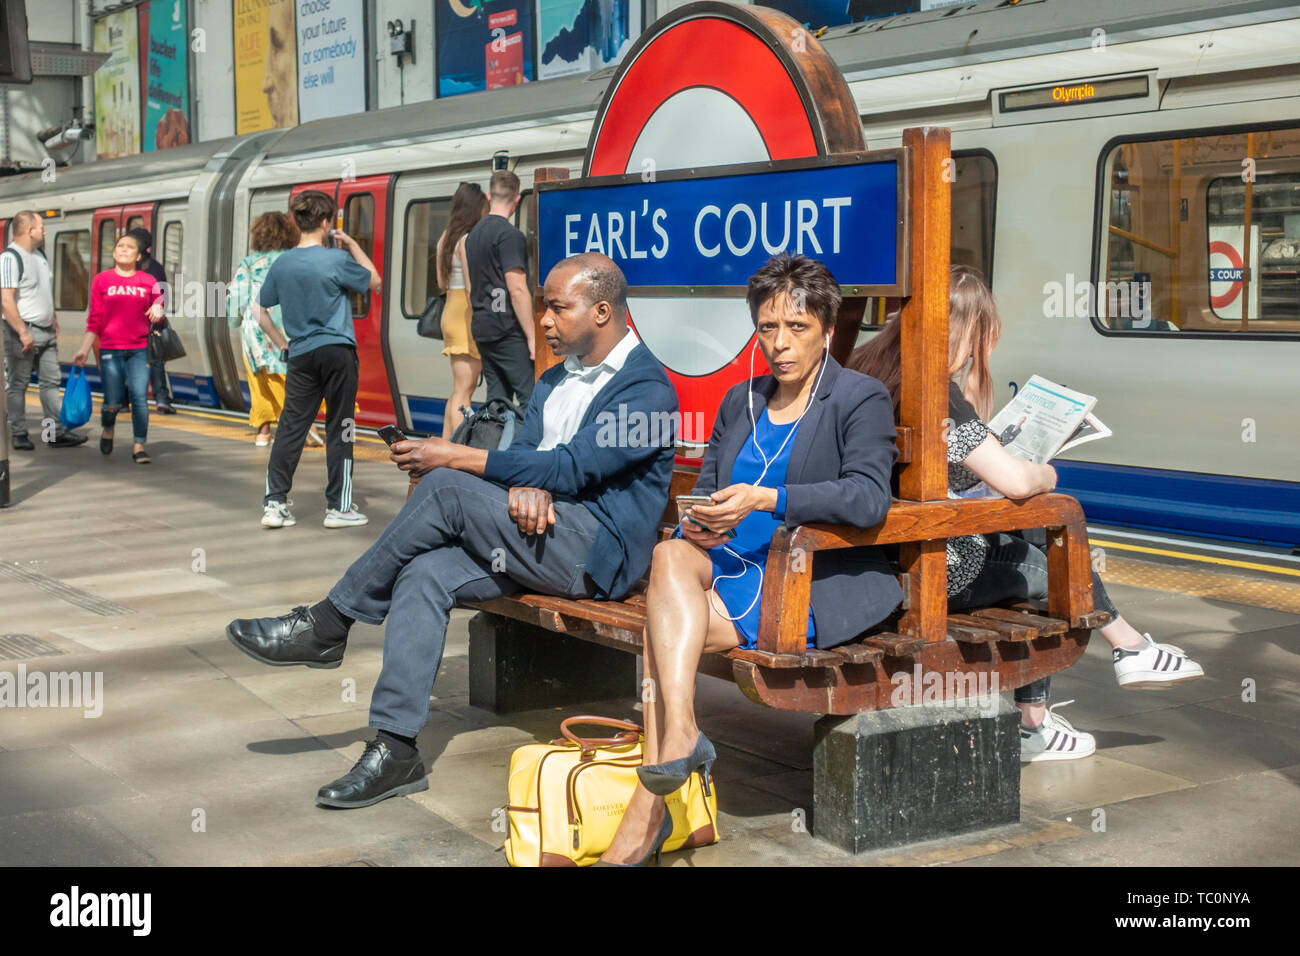 People sit on a bench on the platform at Earl's Court London Underground Station Stock Photo